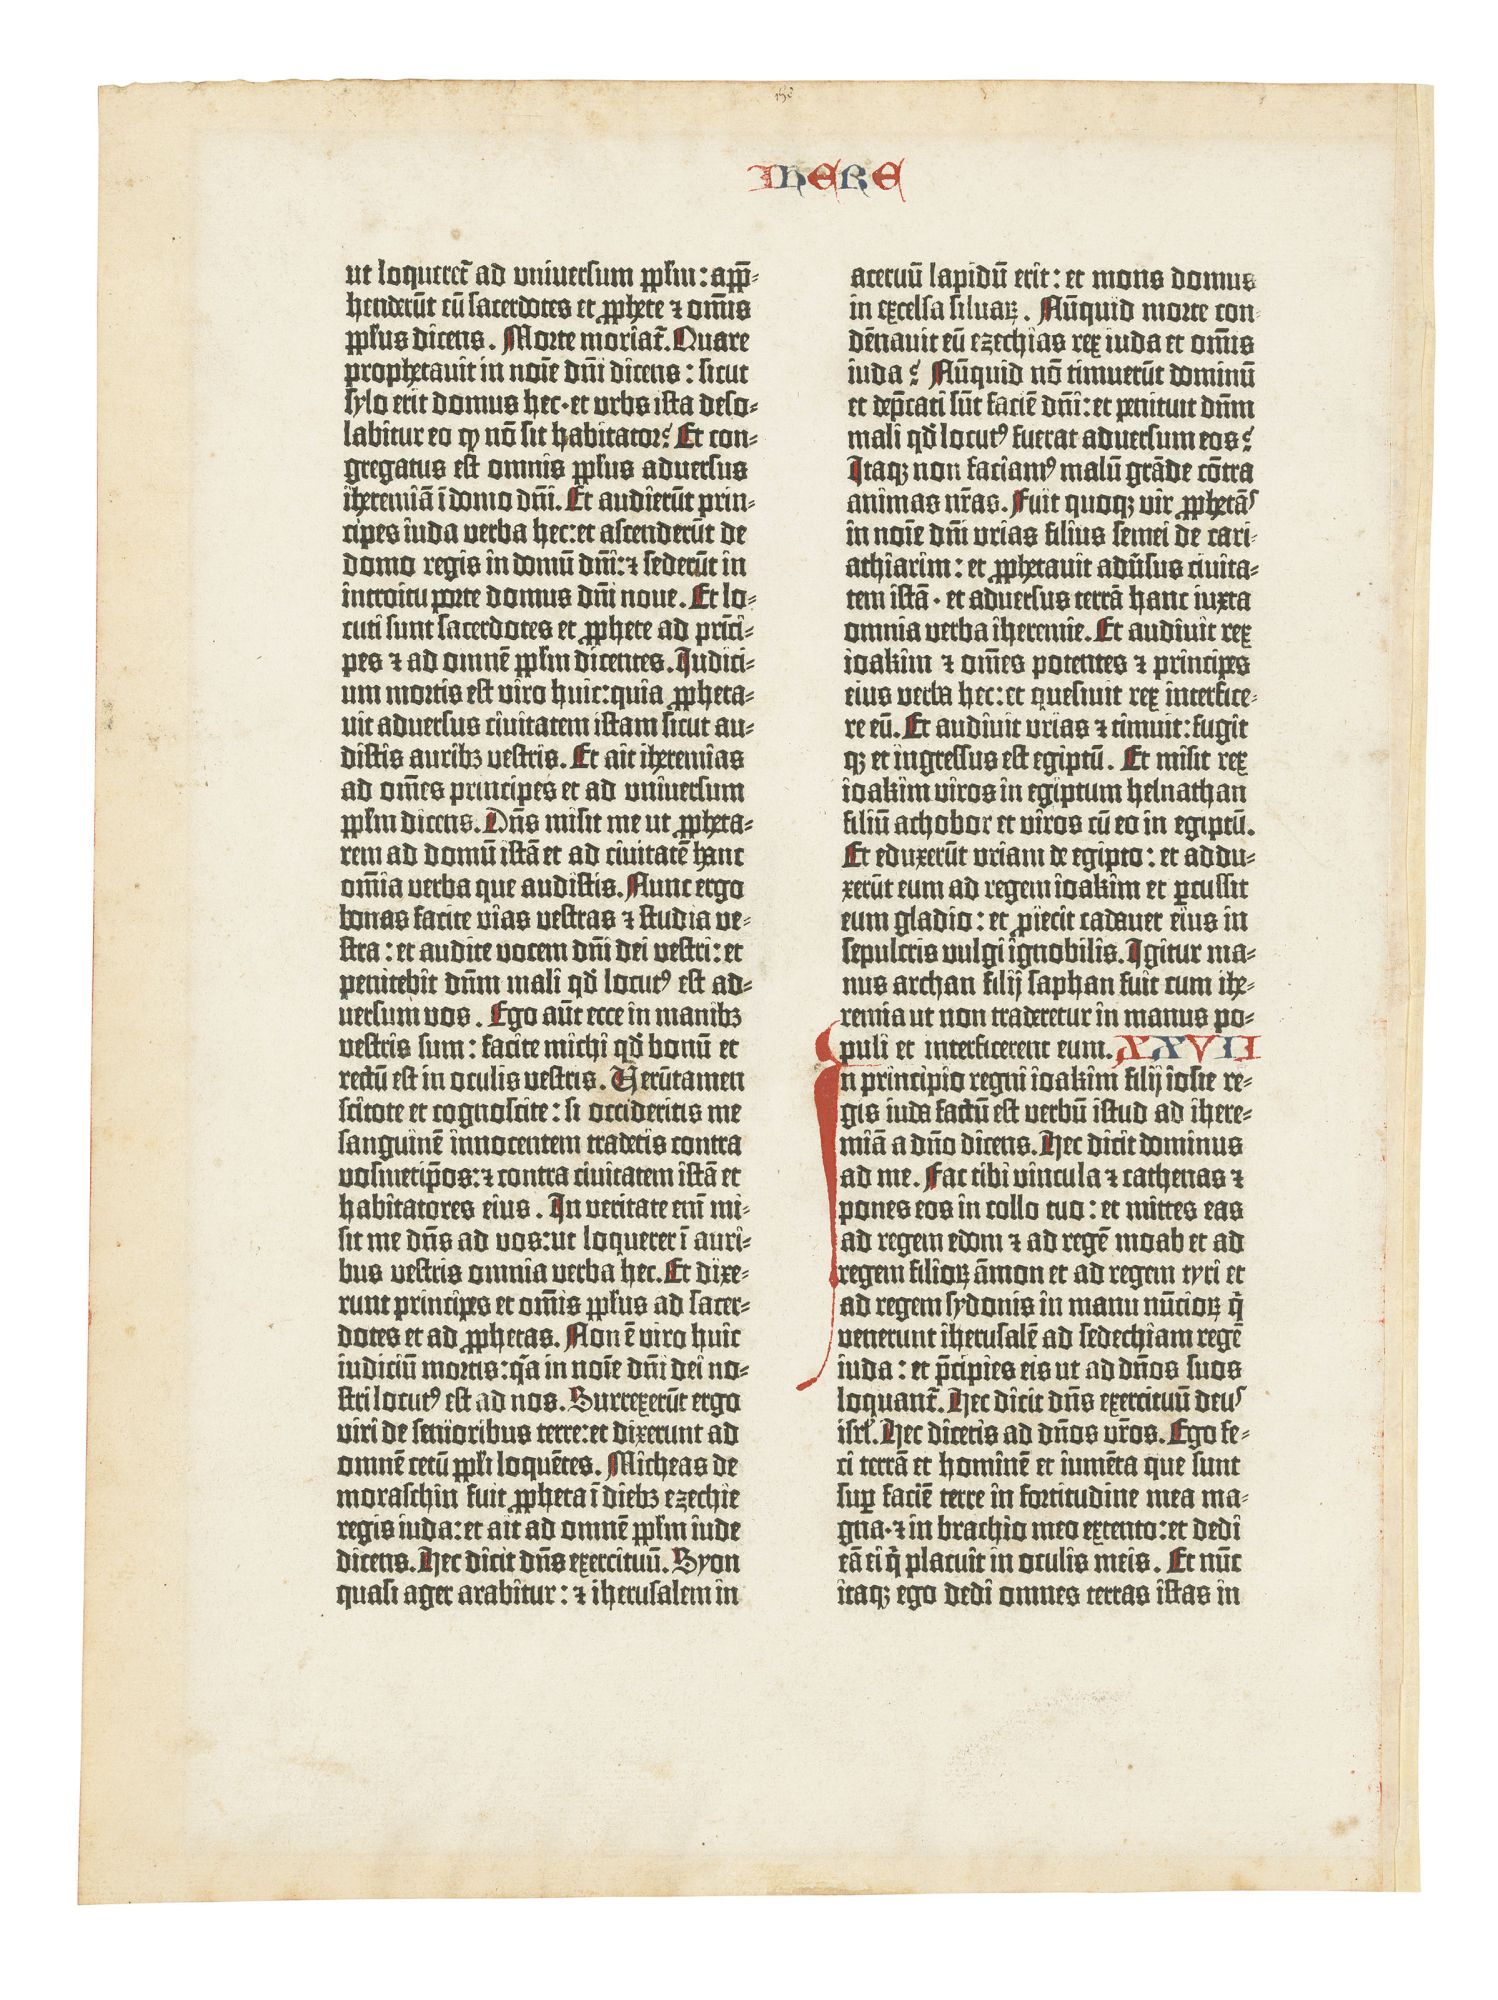 Item #32437 A LEAF FROM THE GUTENBERG BIBLE: From the Book of Jeremiah [25:19 to 27:6]. Printer. Bible Gutenberg, in Latin.